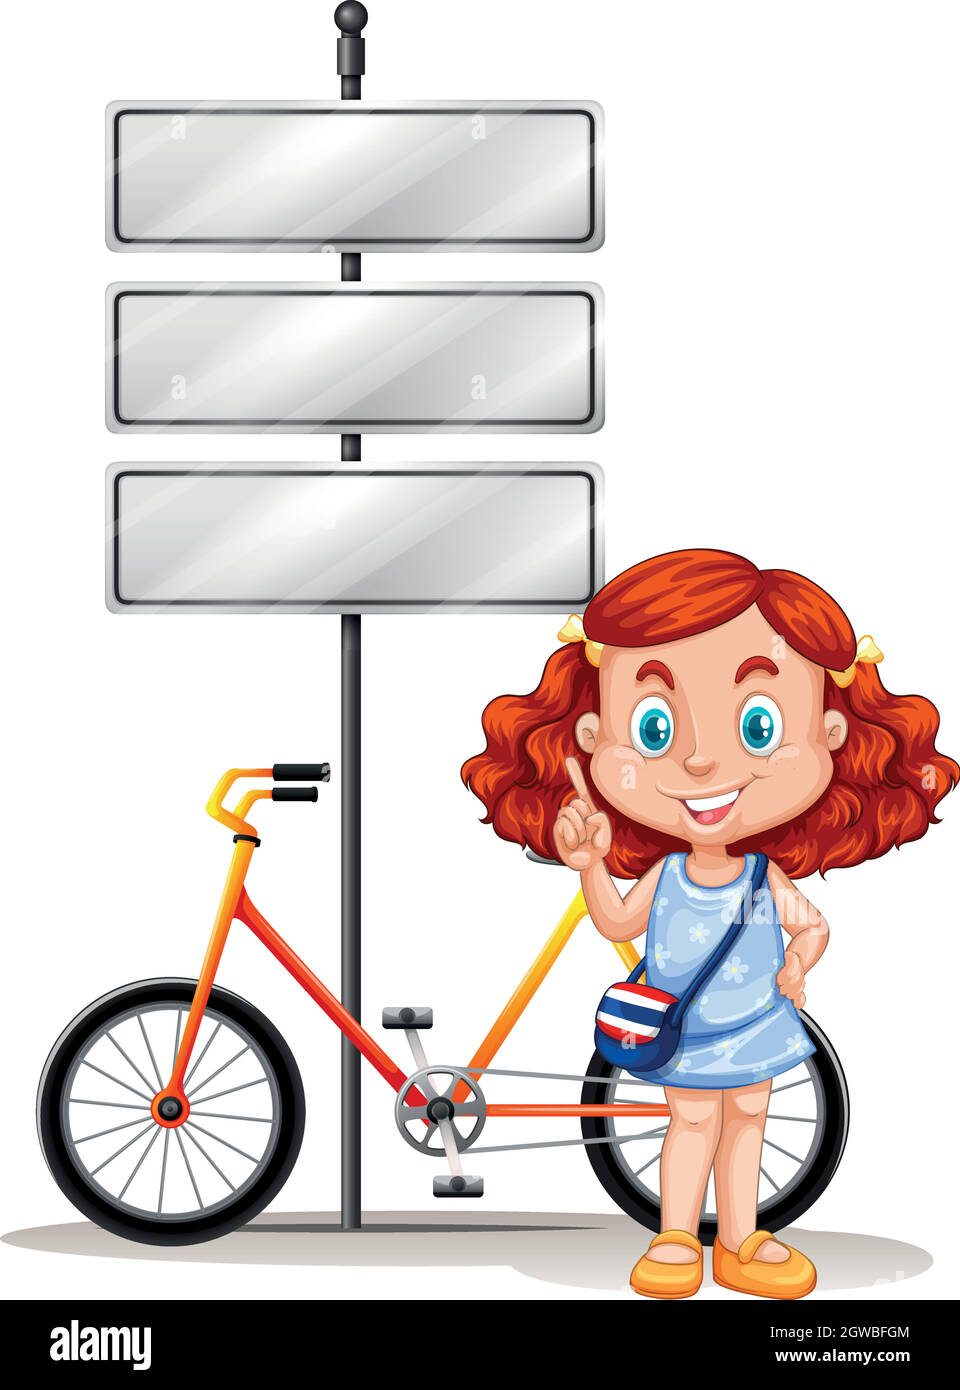 Girl standing next to bike and signs Stock Vector